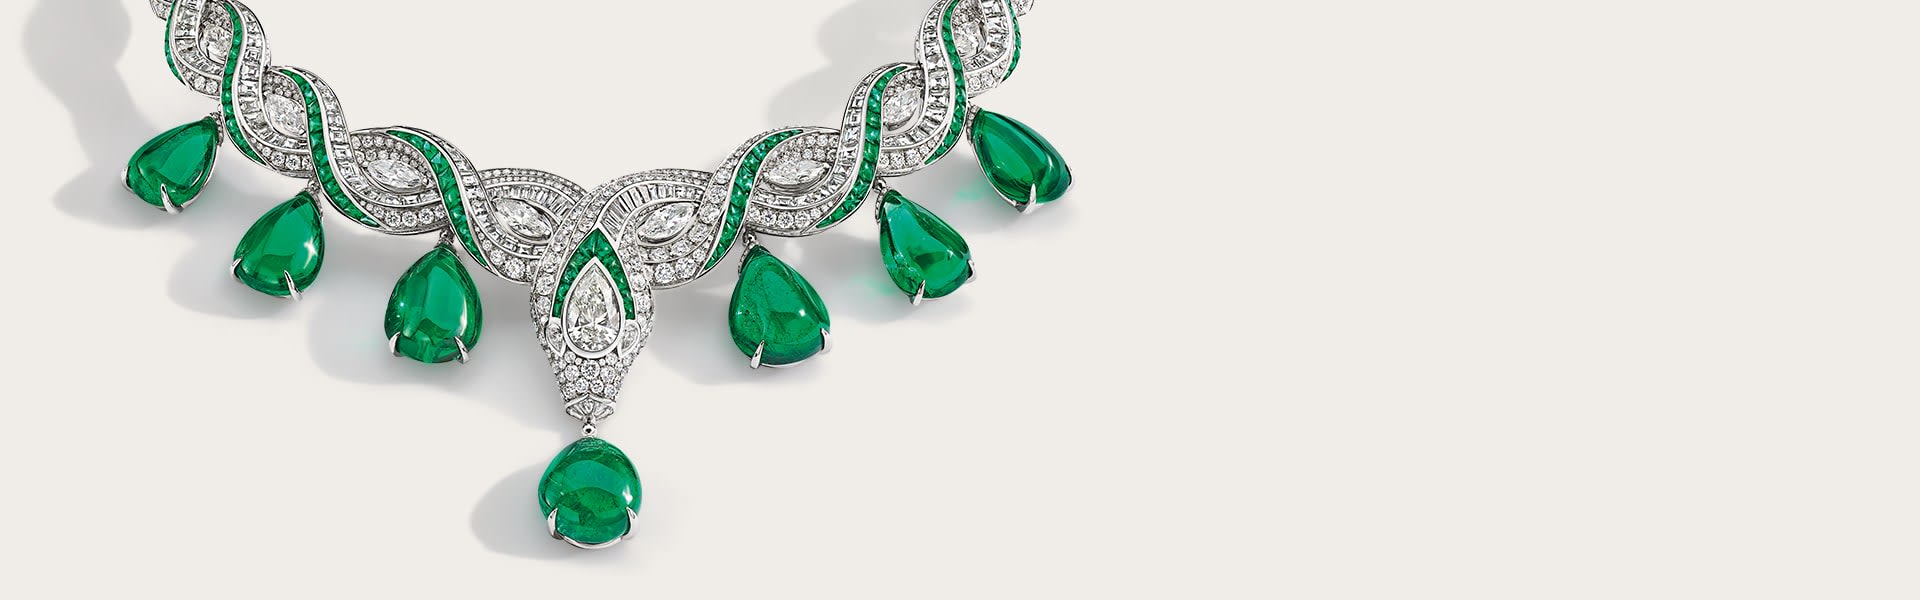 Serpenti Baroque High Jewellery platinum necklace with emeralds and diamonds, close-up.